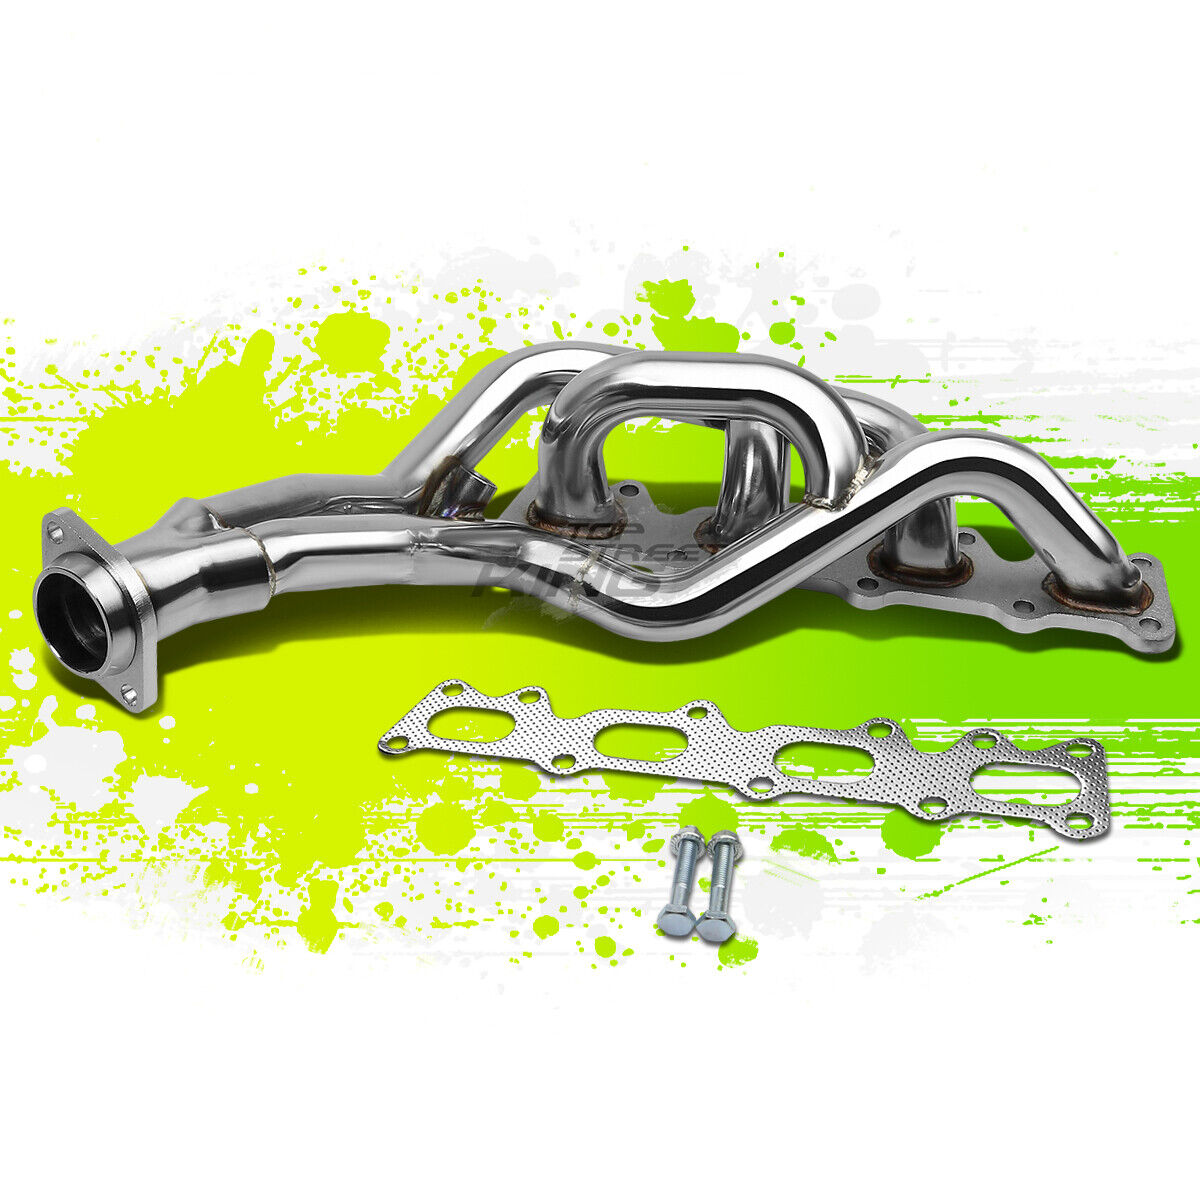 4-2-1 Racing Exhaust Header for C220 C230 SLK230 W202 W203 R170 4 Cylinder 95-08